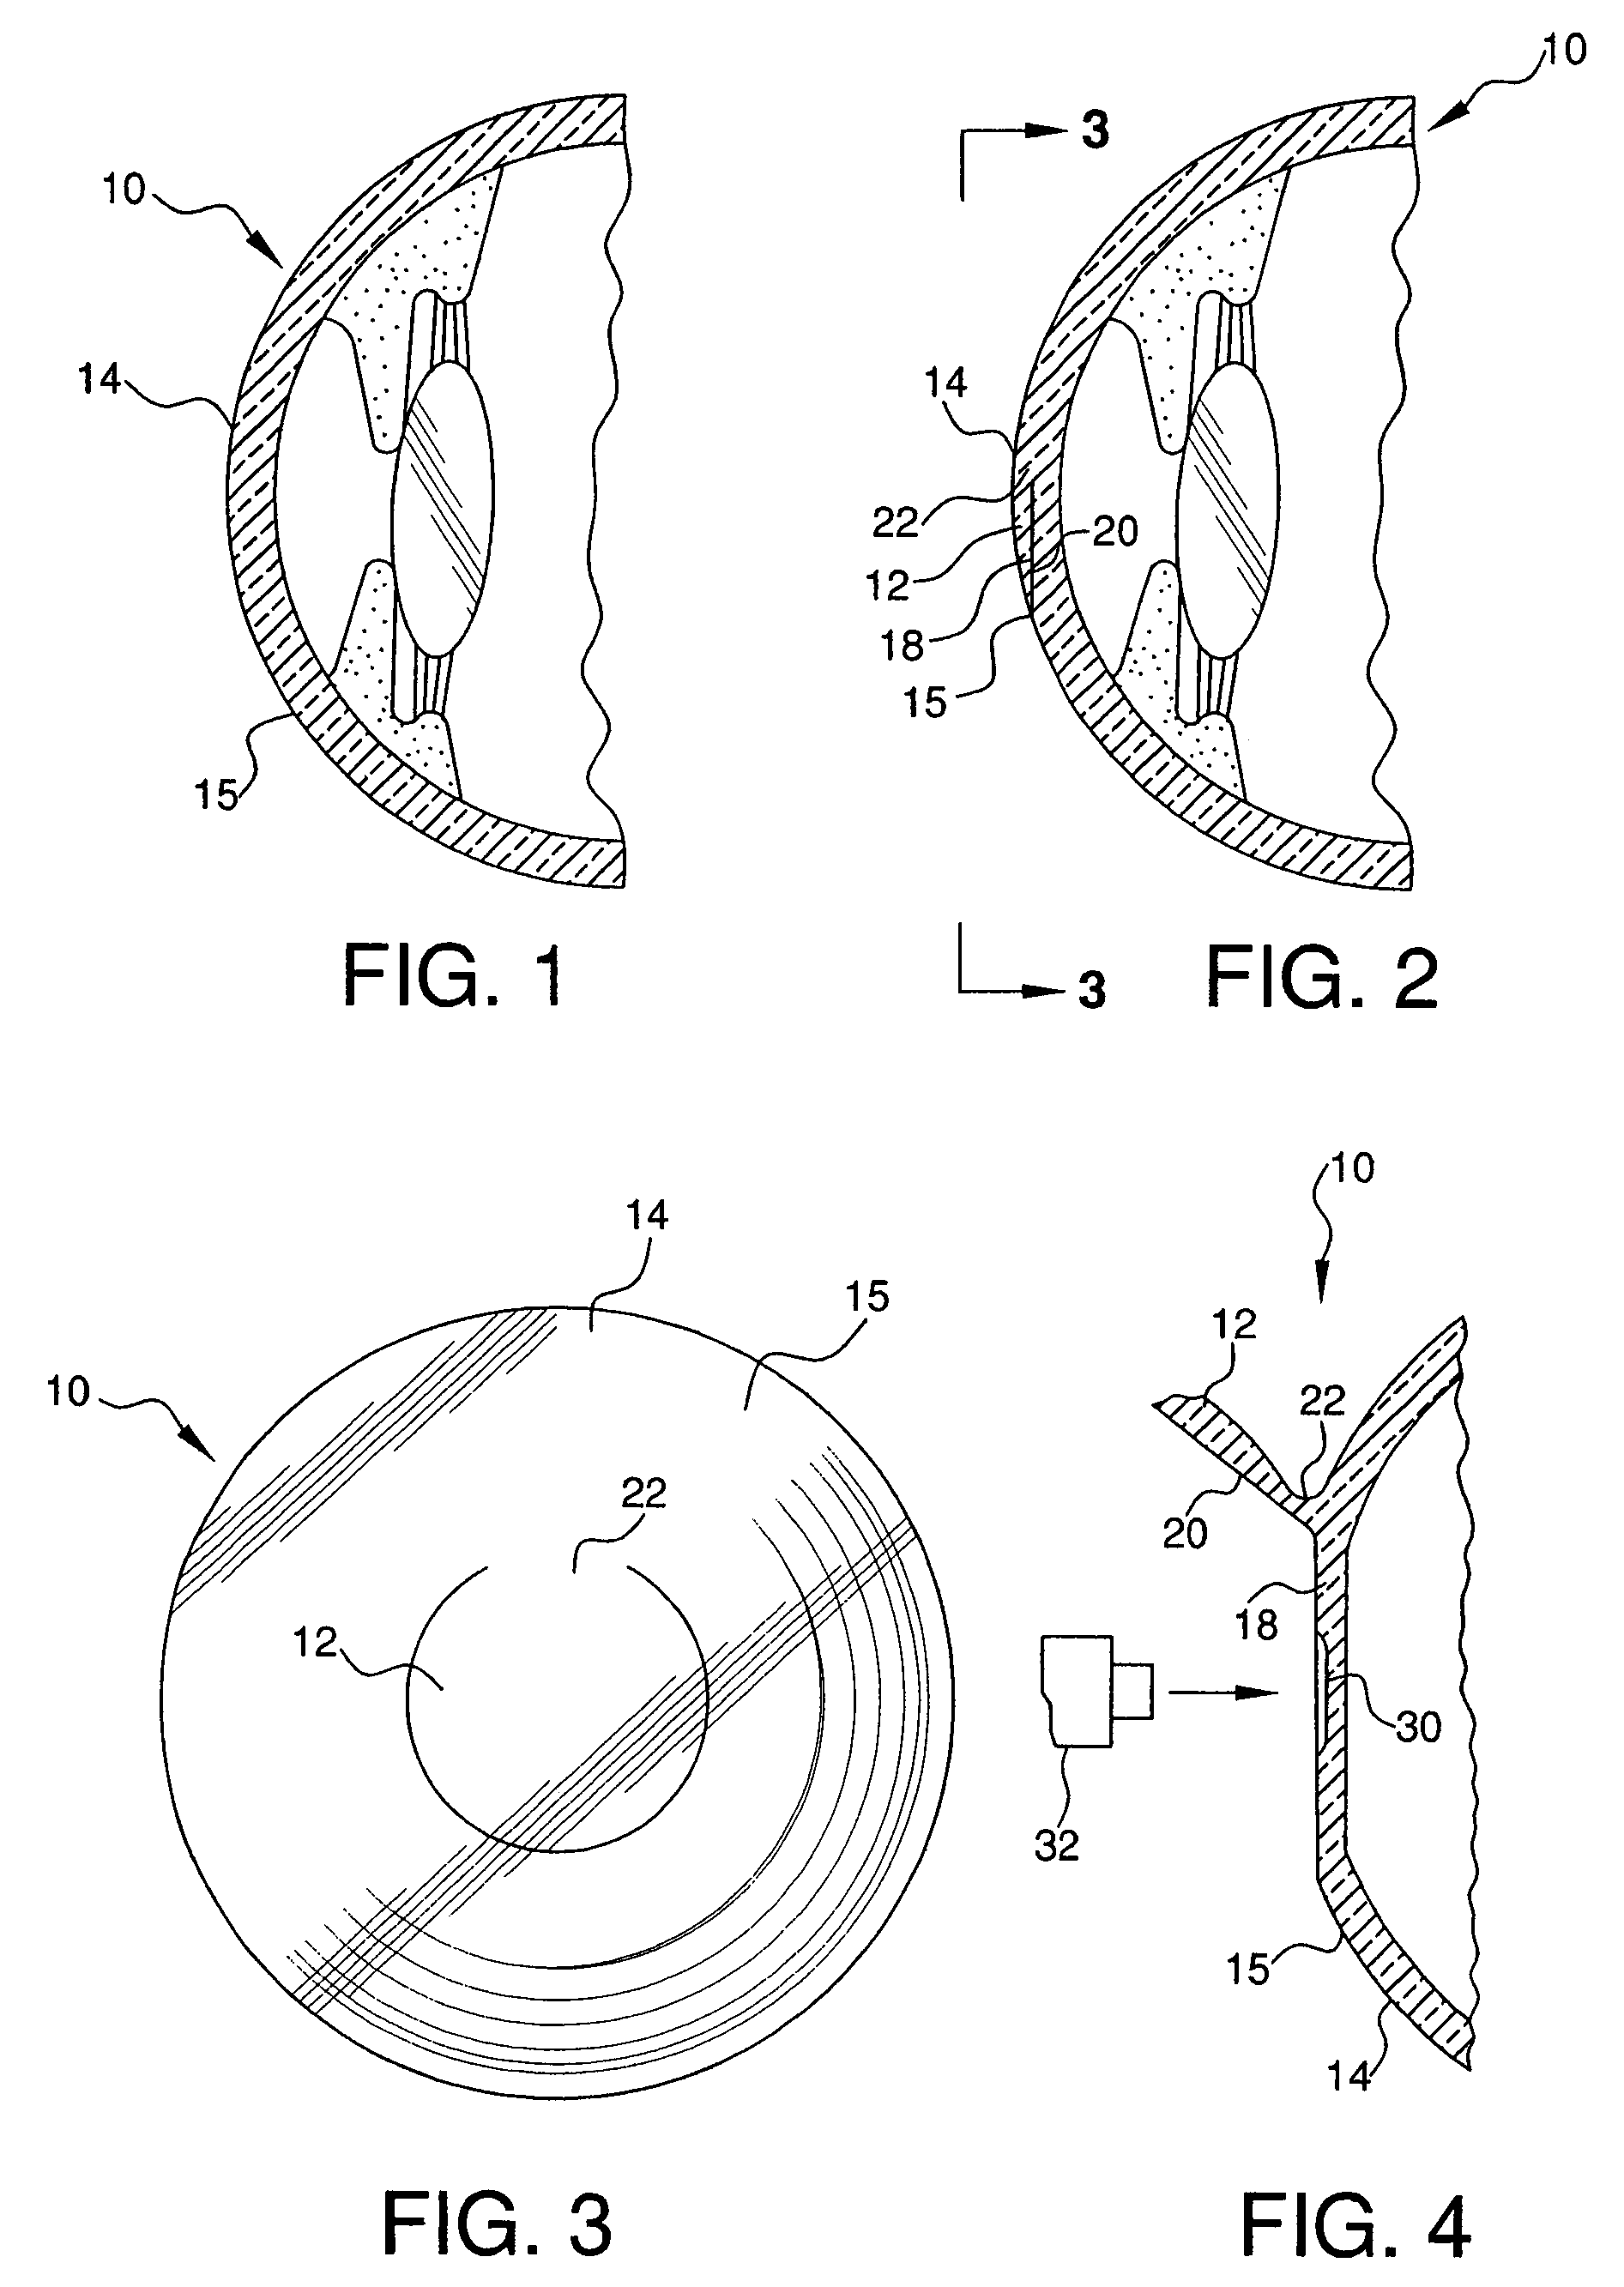 Method for producing a multifocal corneal surface using intracorneal microscopic lenses